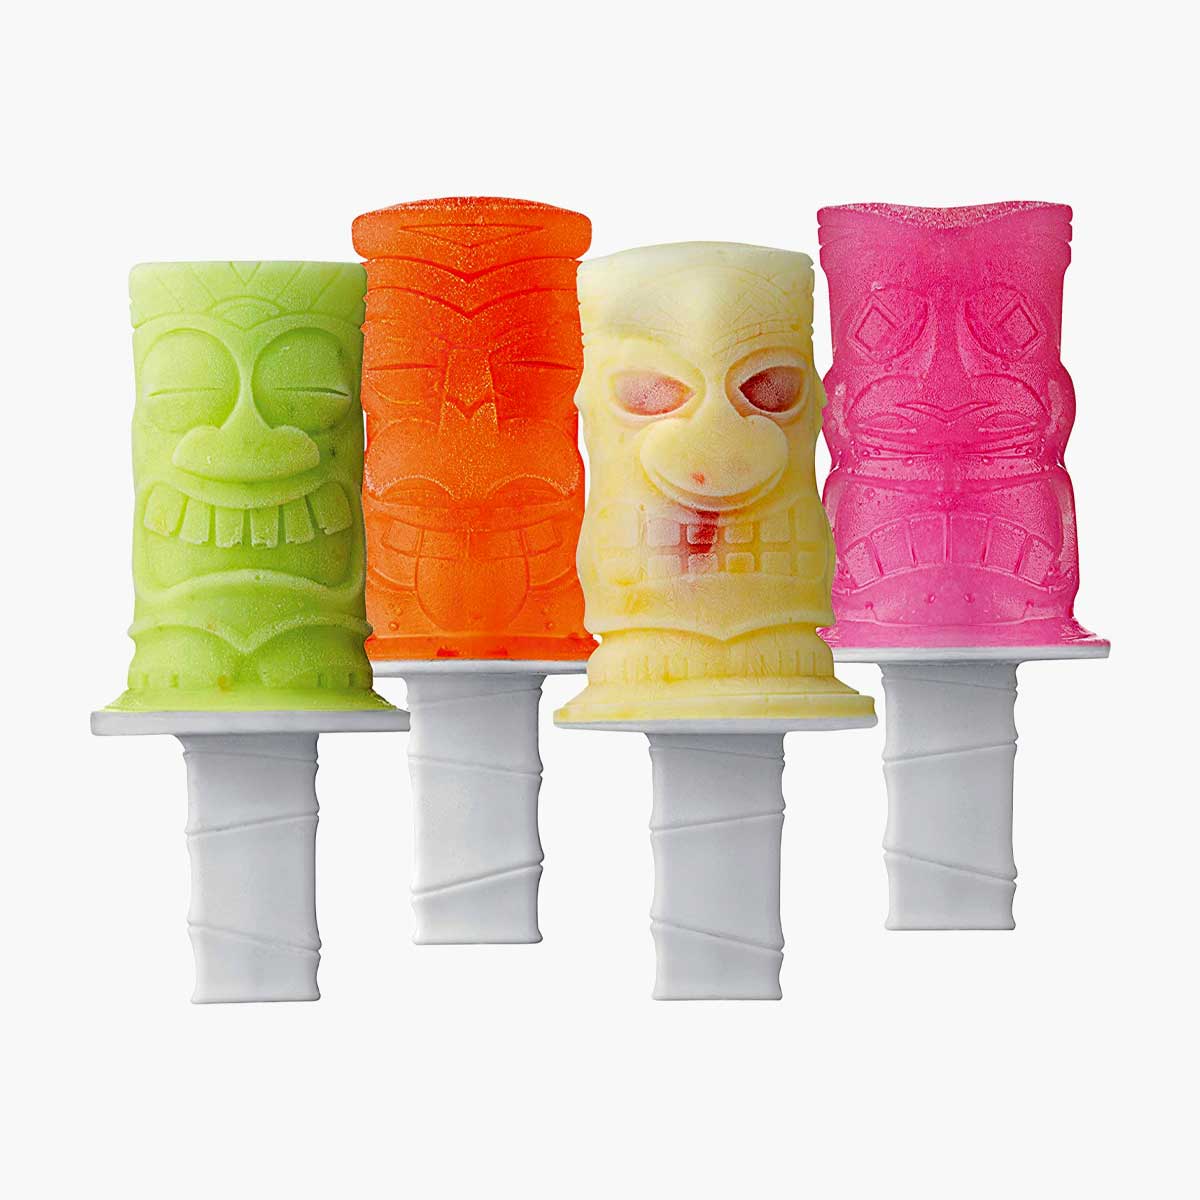 Four Tovolo tiki ice pop molds in different colors.